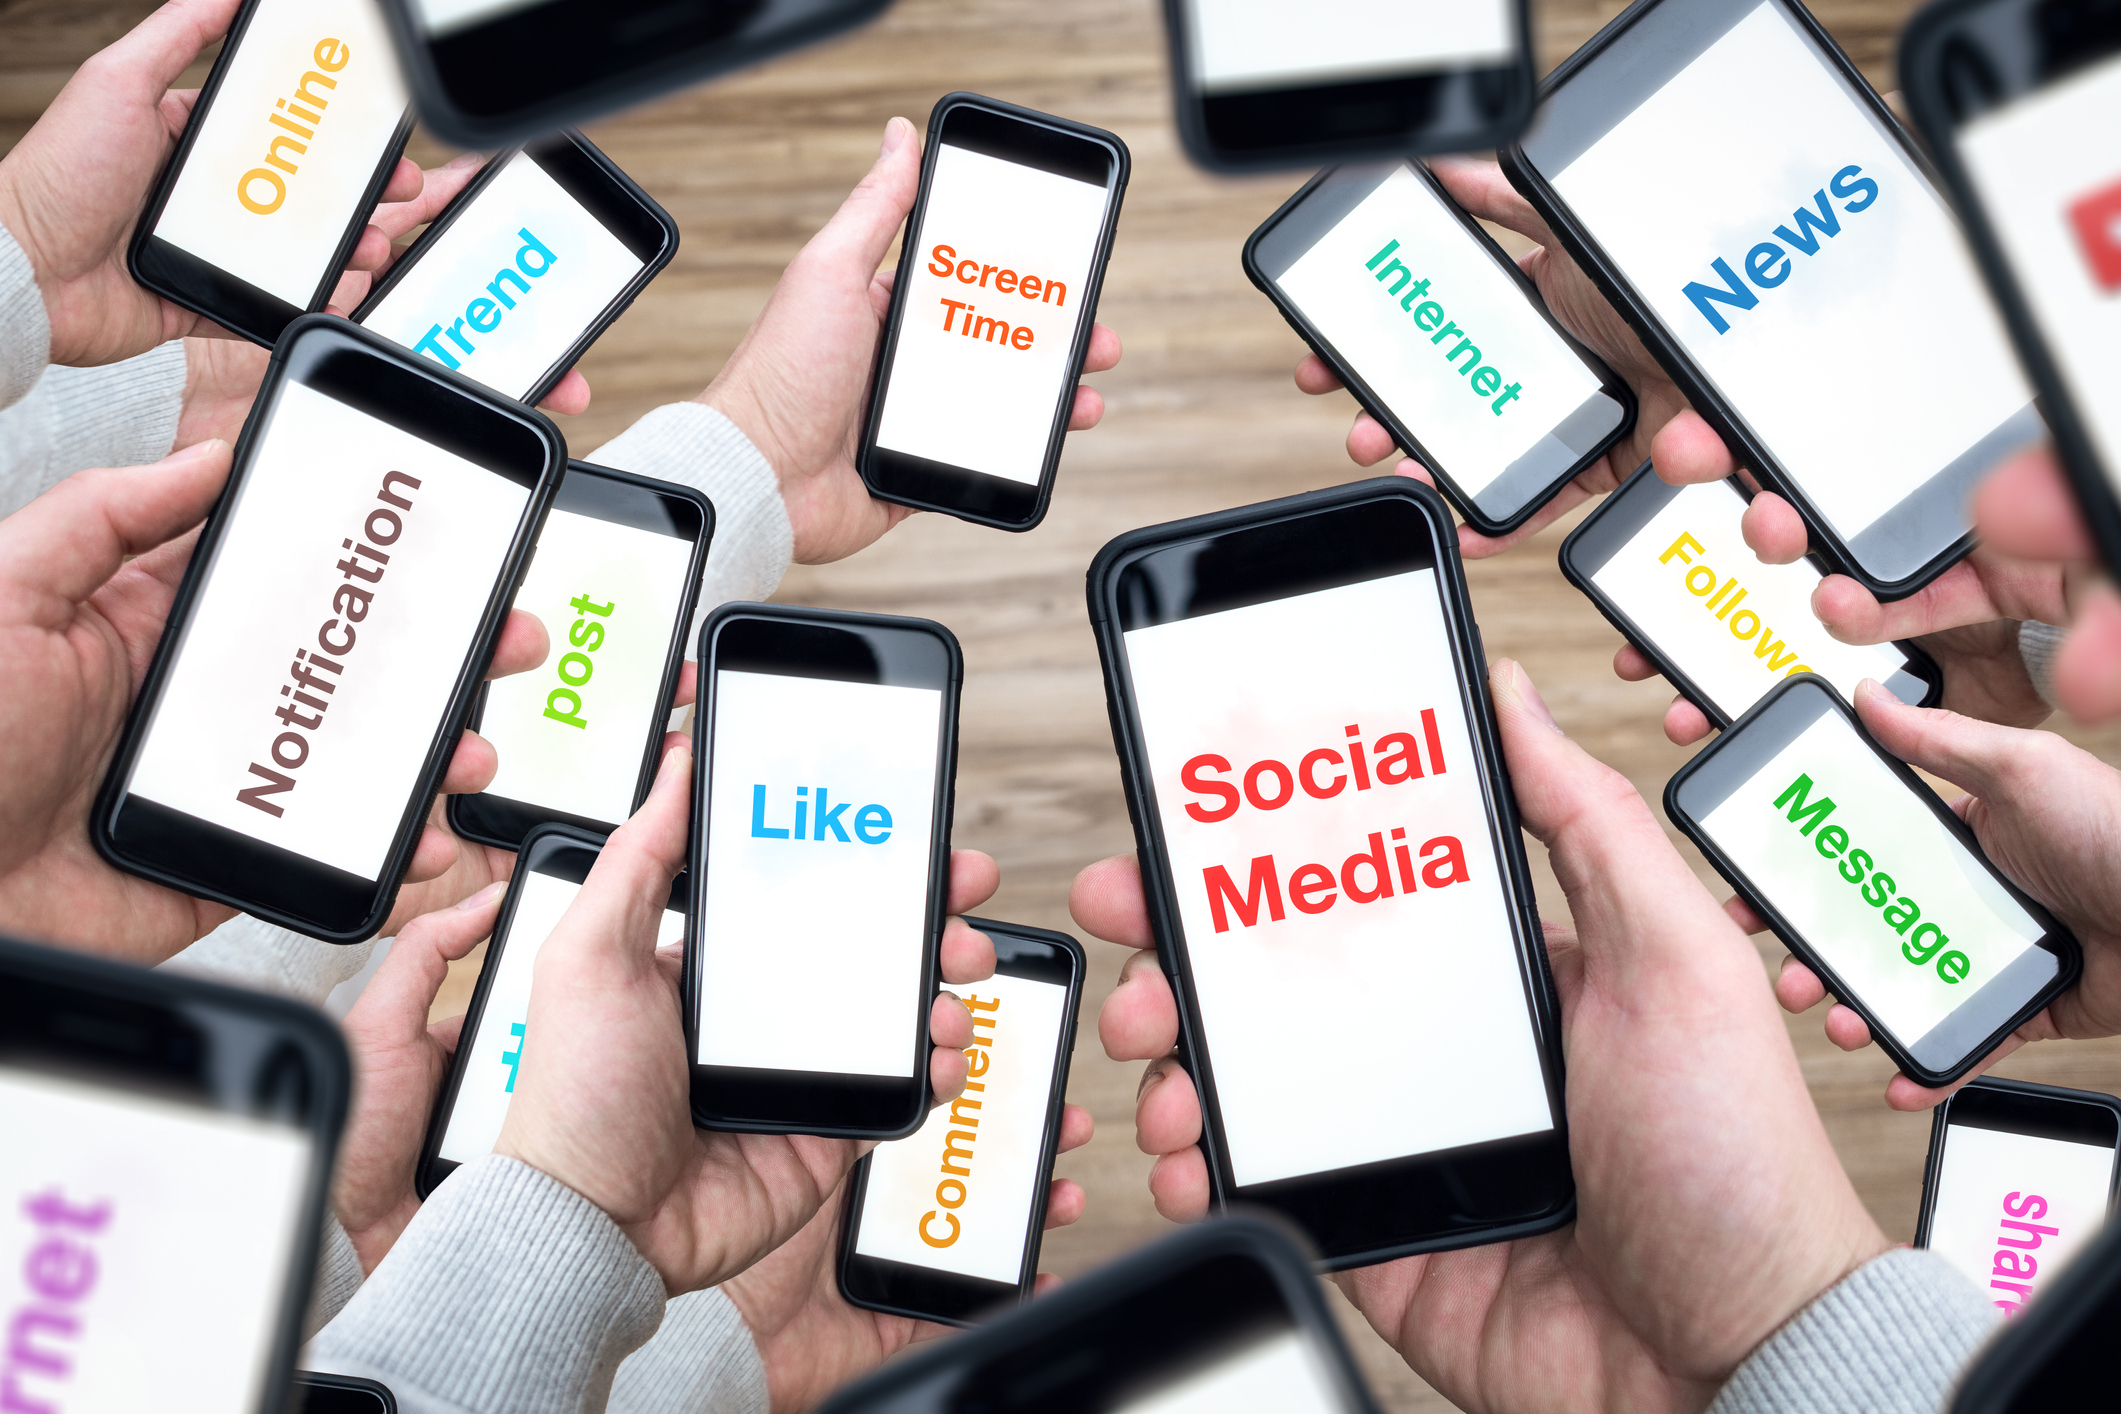 Stock Image of a Multitude Of Hands Holding Cell Phones with Words on the Screens Such As Social Media Like Notification Message Screen Time News Internet